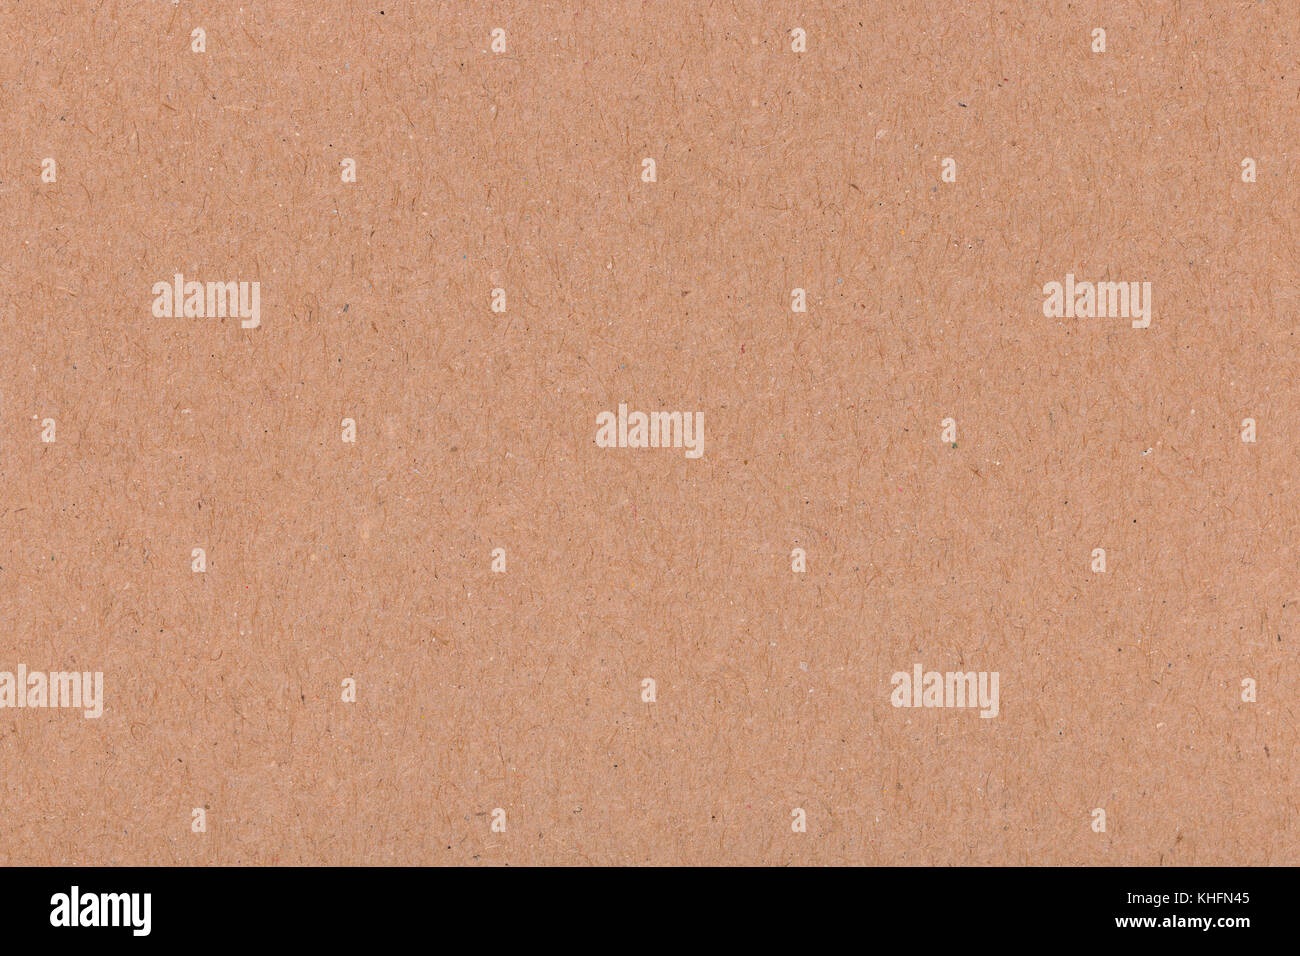 Natural brown recycled paper texture background. Paper texture. Stock Photo